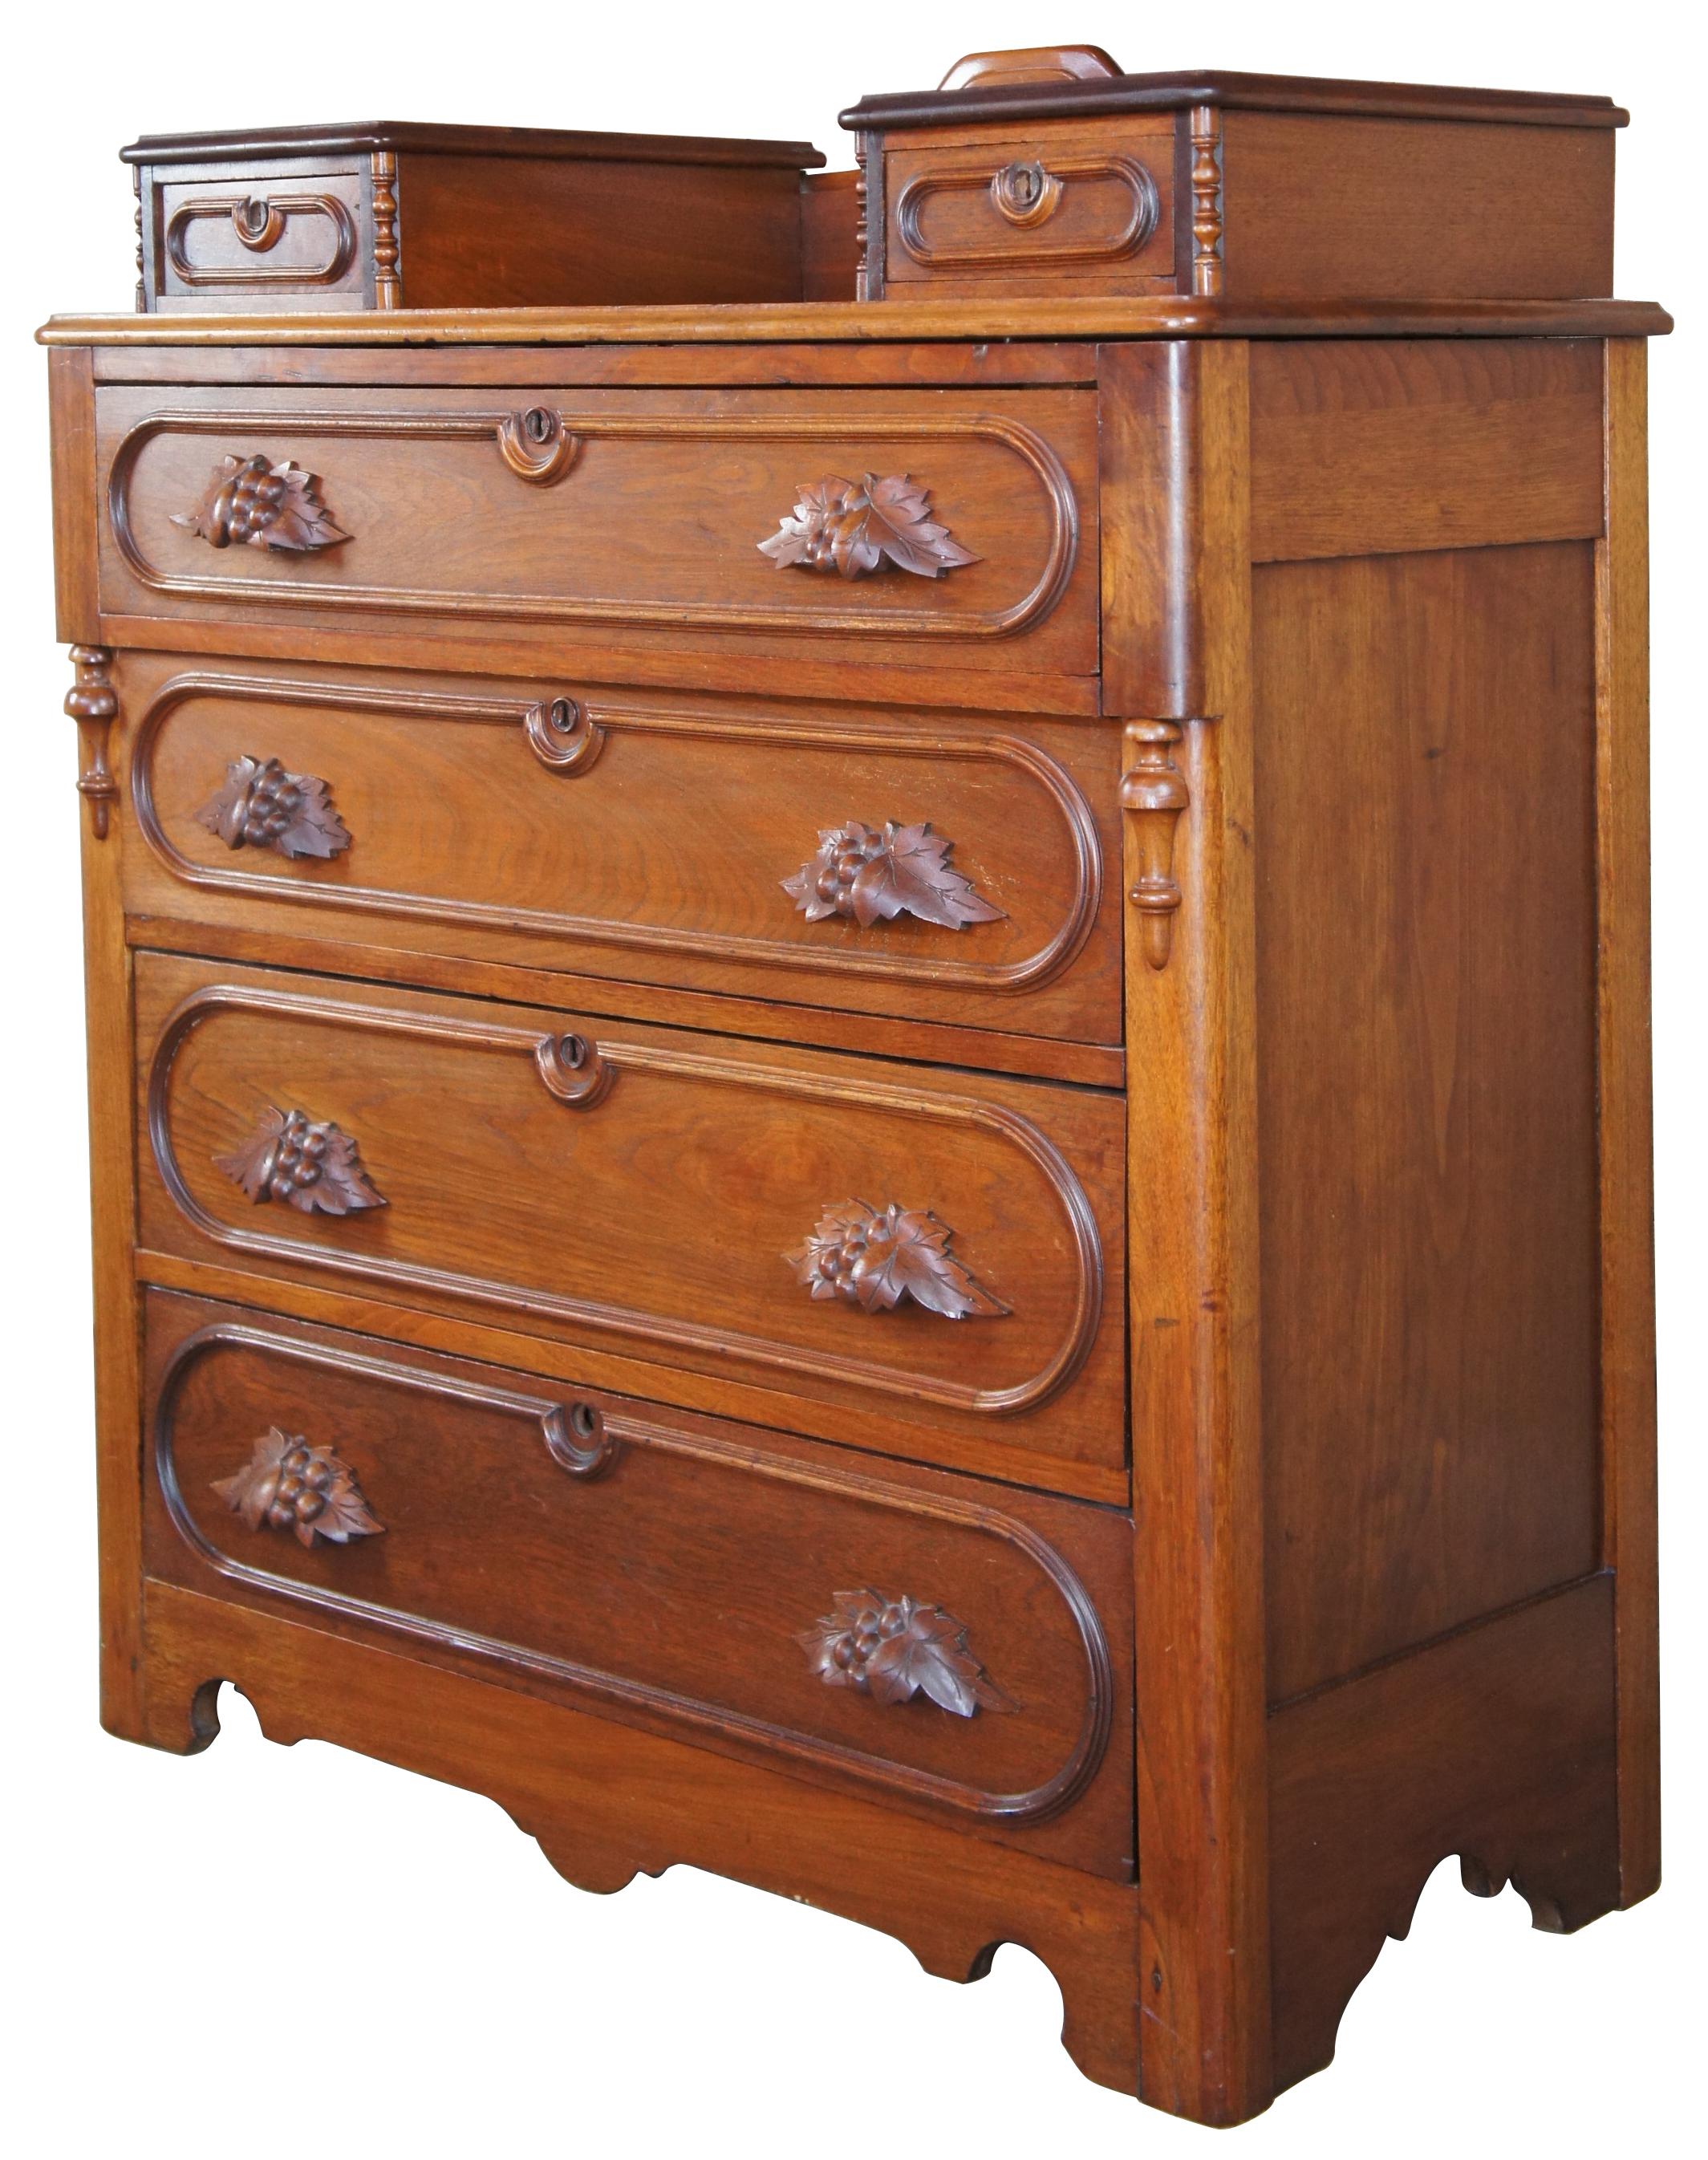 Circa 1880s Victorian dresser. Made from walnut with two glovebox drawers over four larger lower drawers. Features ovular shaped drawer trim, fruit and nut carved pulls, downward turned finials and serpentine cut lower apron. The drawers are